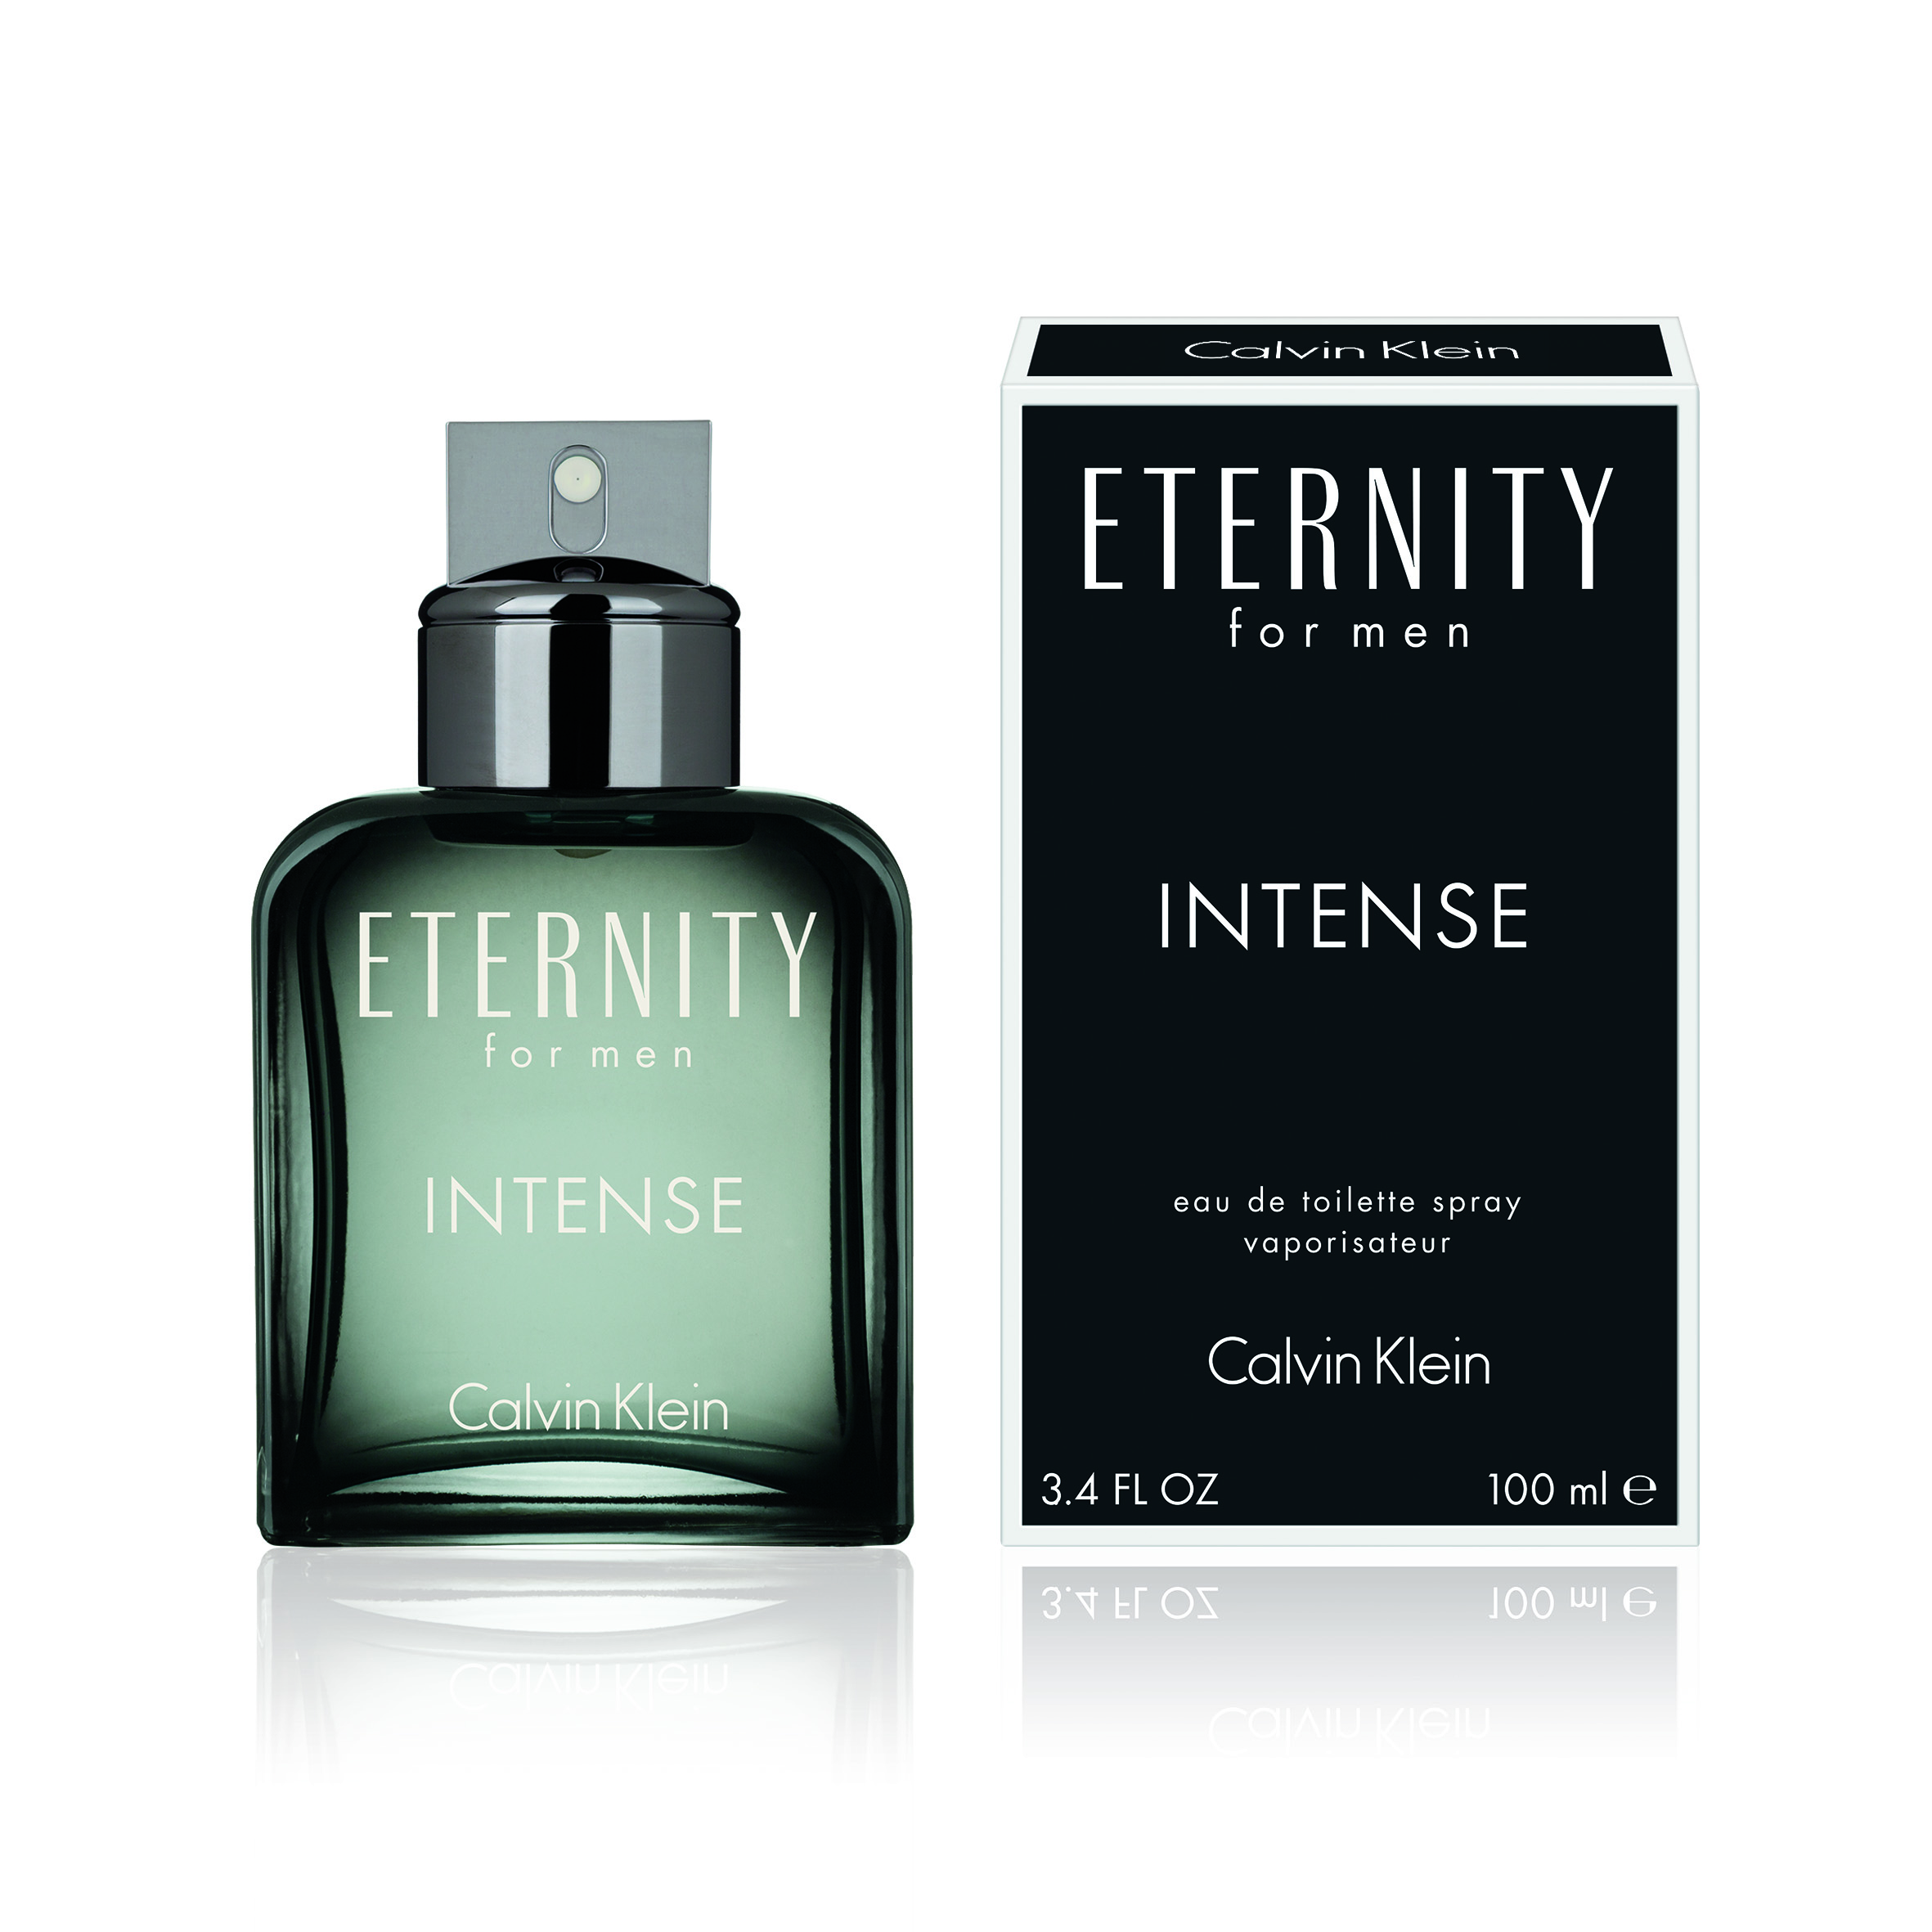 Eternity Intense Calvin Klein for men also takes the recognisable shape of the original bottle, this time adding a gradation of rich charcoal shades